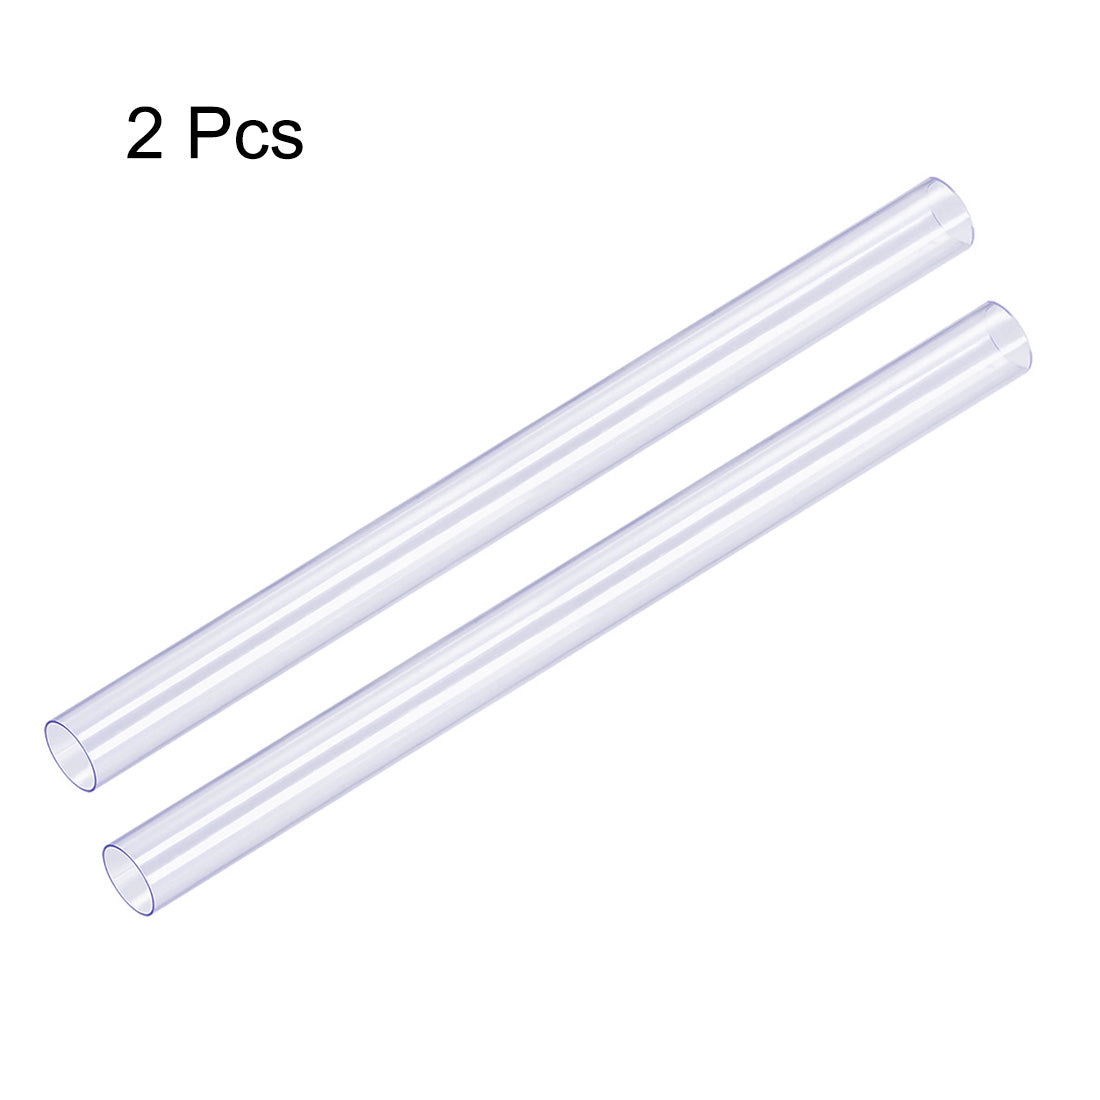 uxcell Uxcell PVC Rigid Round Tubing,Clear with light blue ,20mm ID x 25mm OD,0.5M/1.64Ft Length,2pcs